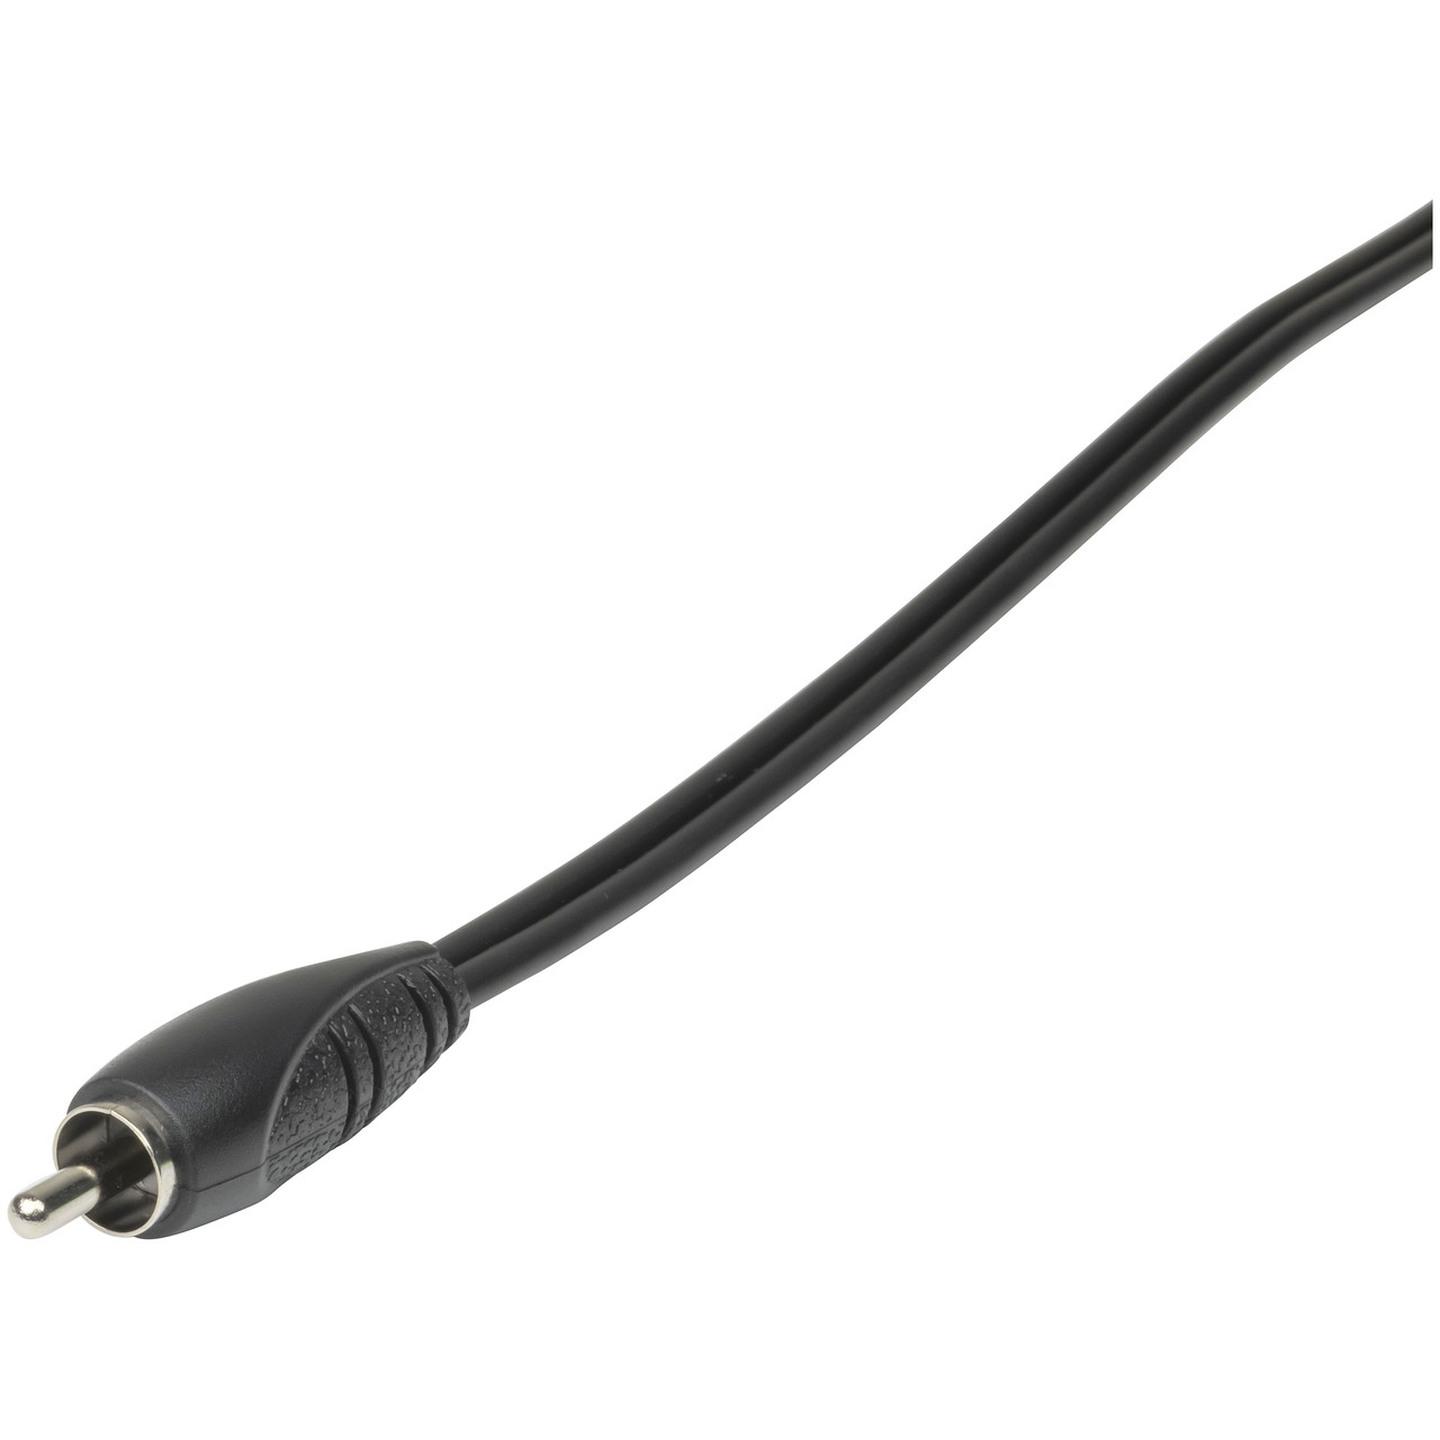 RCA Plug to 2 x RCA Sockets Audio Cable - 300mm